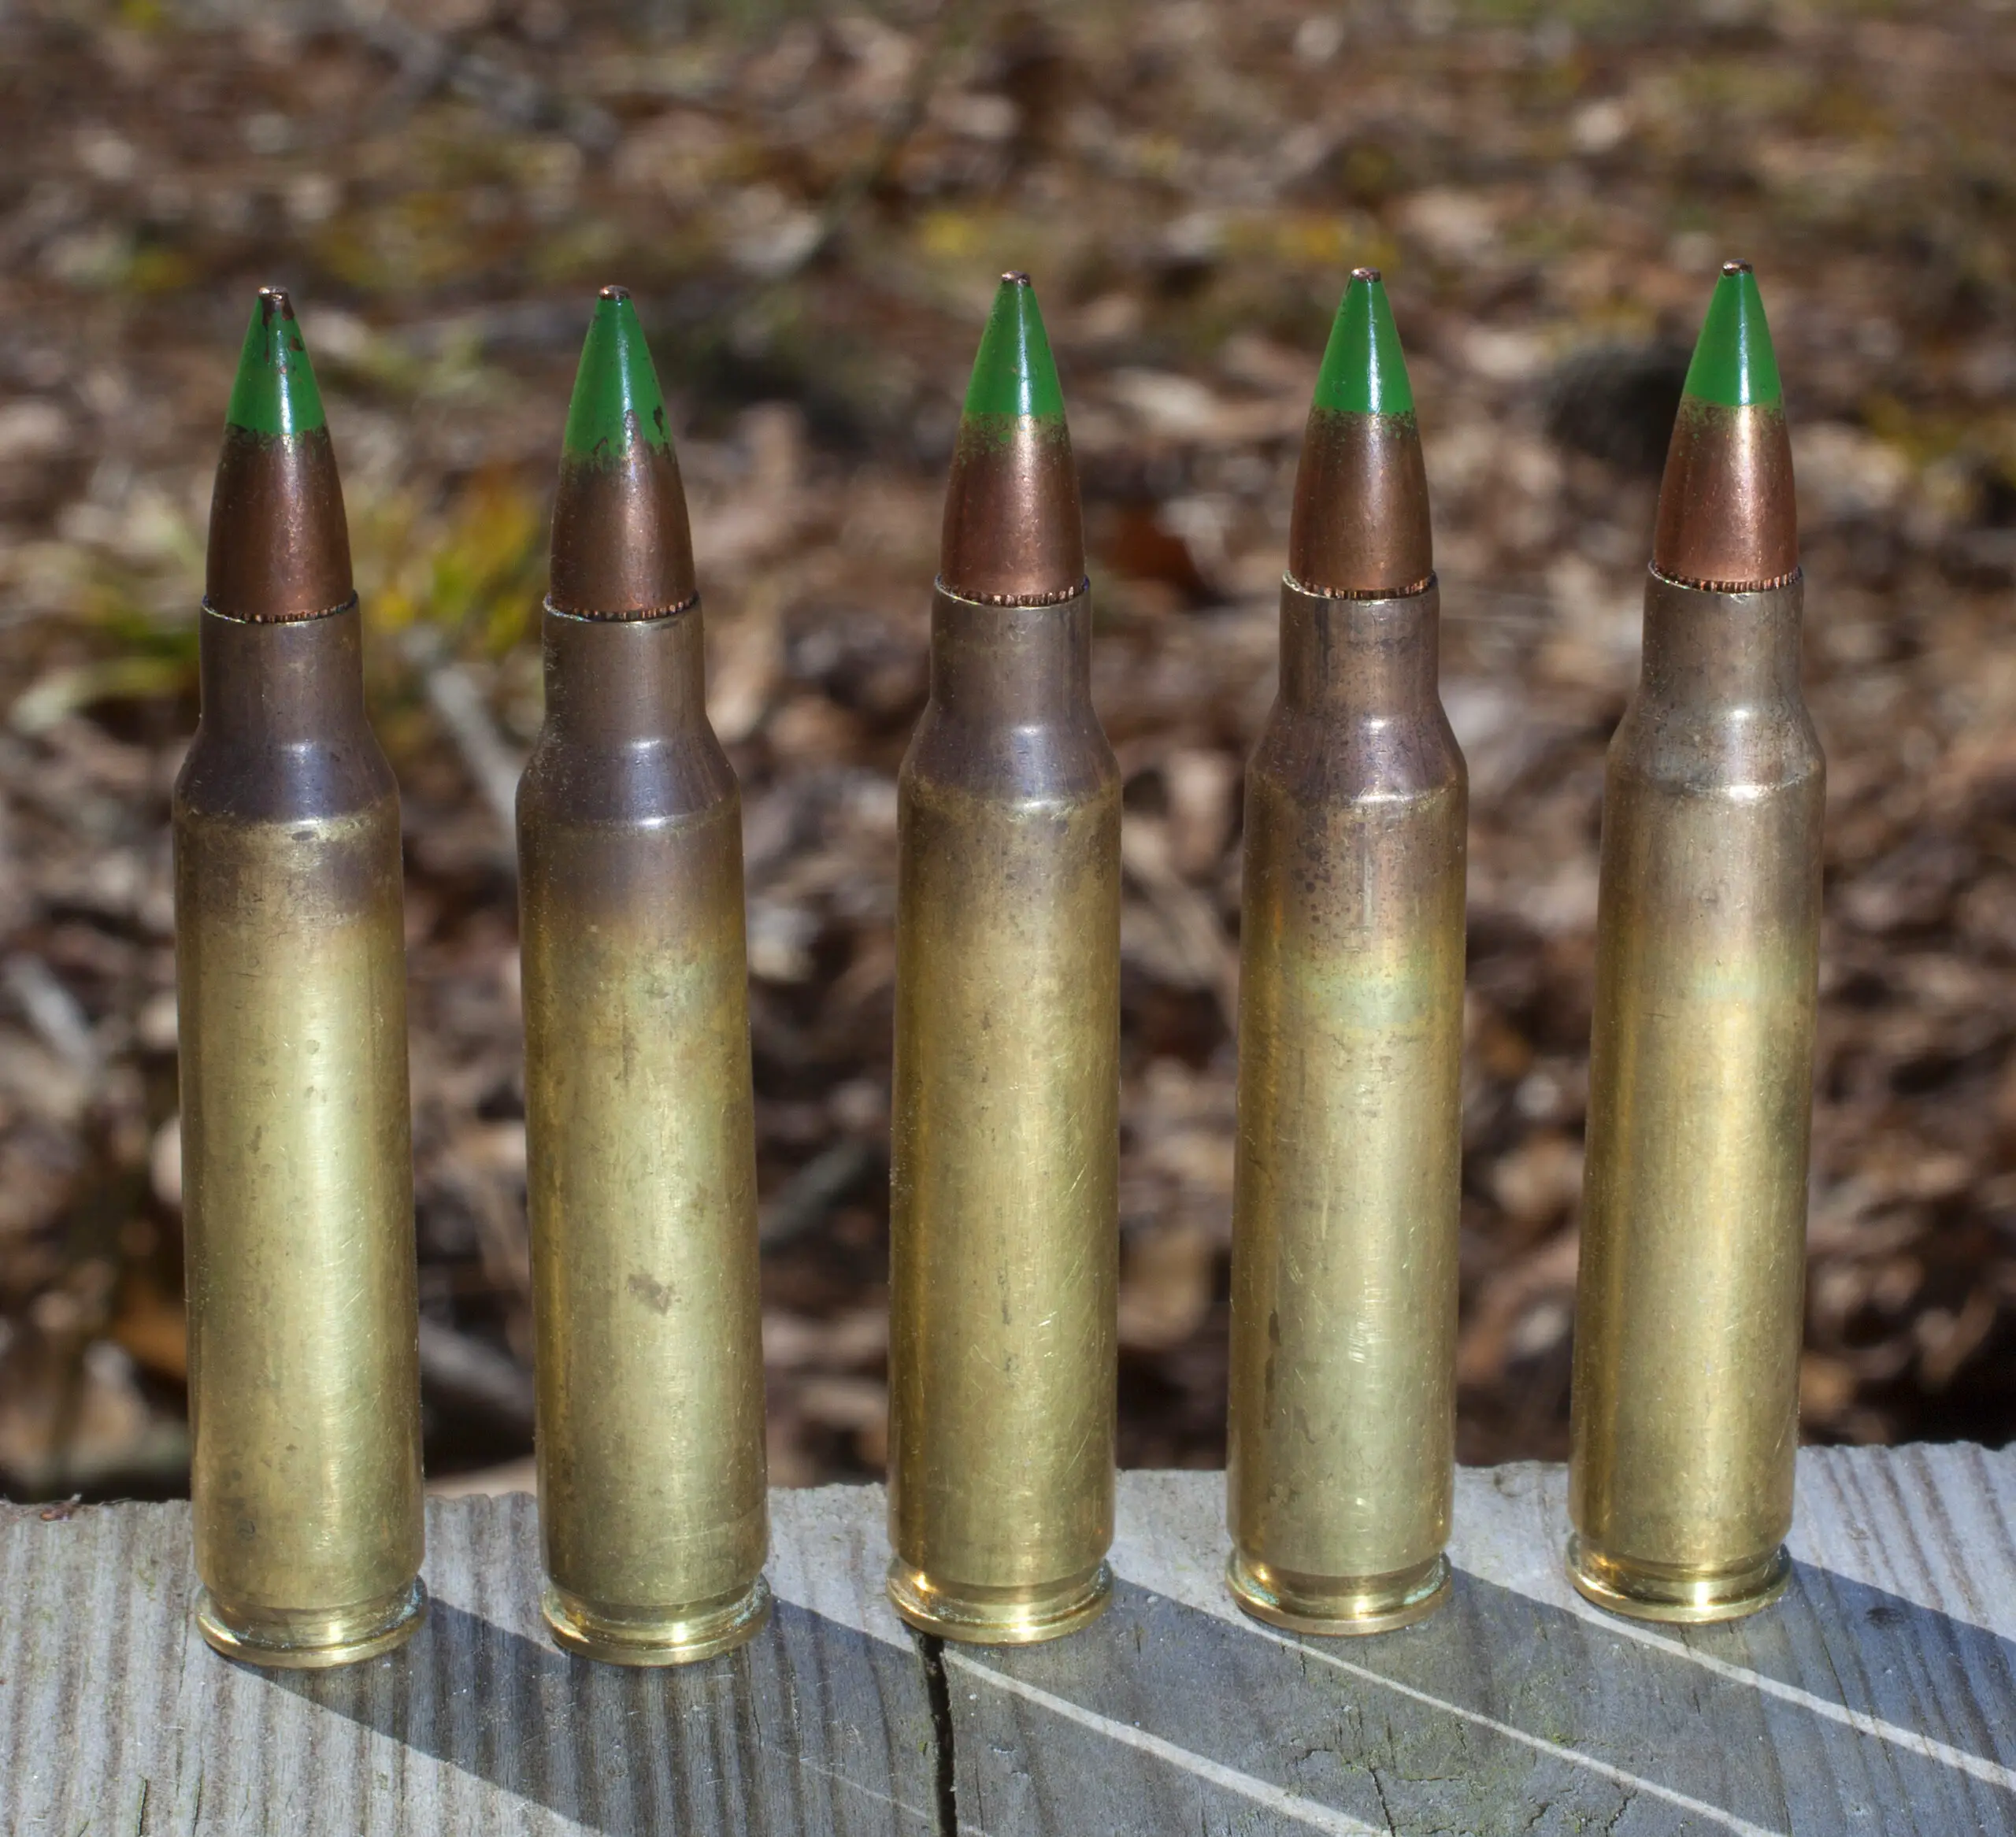 5.56x45mm NATO SS109/M855 cartridges with standard 62 gr. lead core bullets with steel penetrator